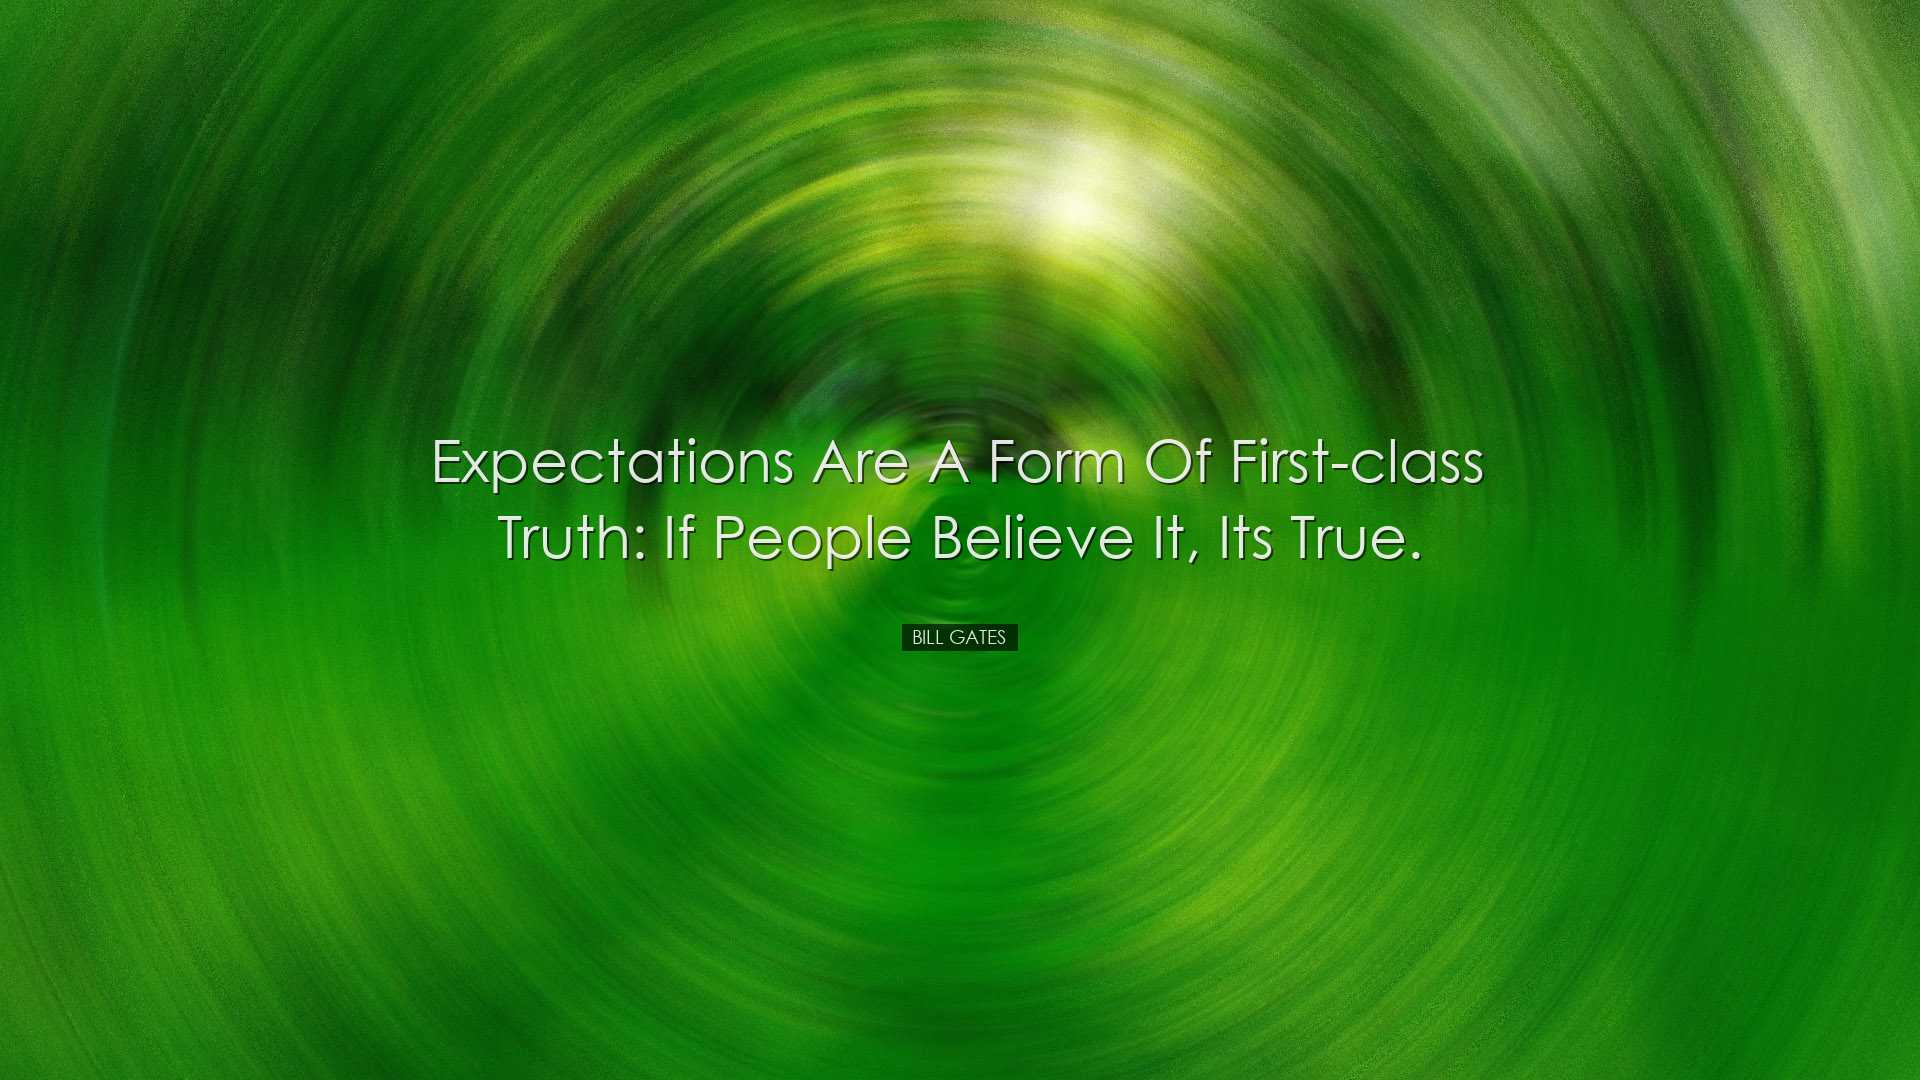 Expectations are a form of first-class truth: If people believe it